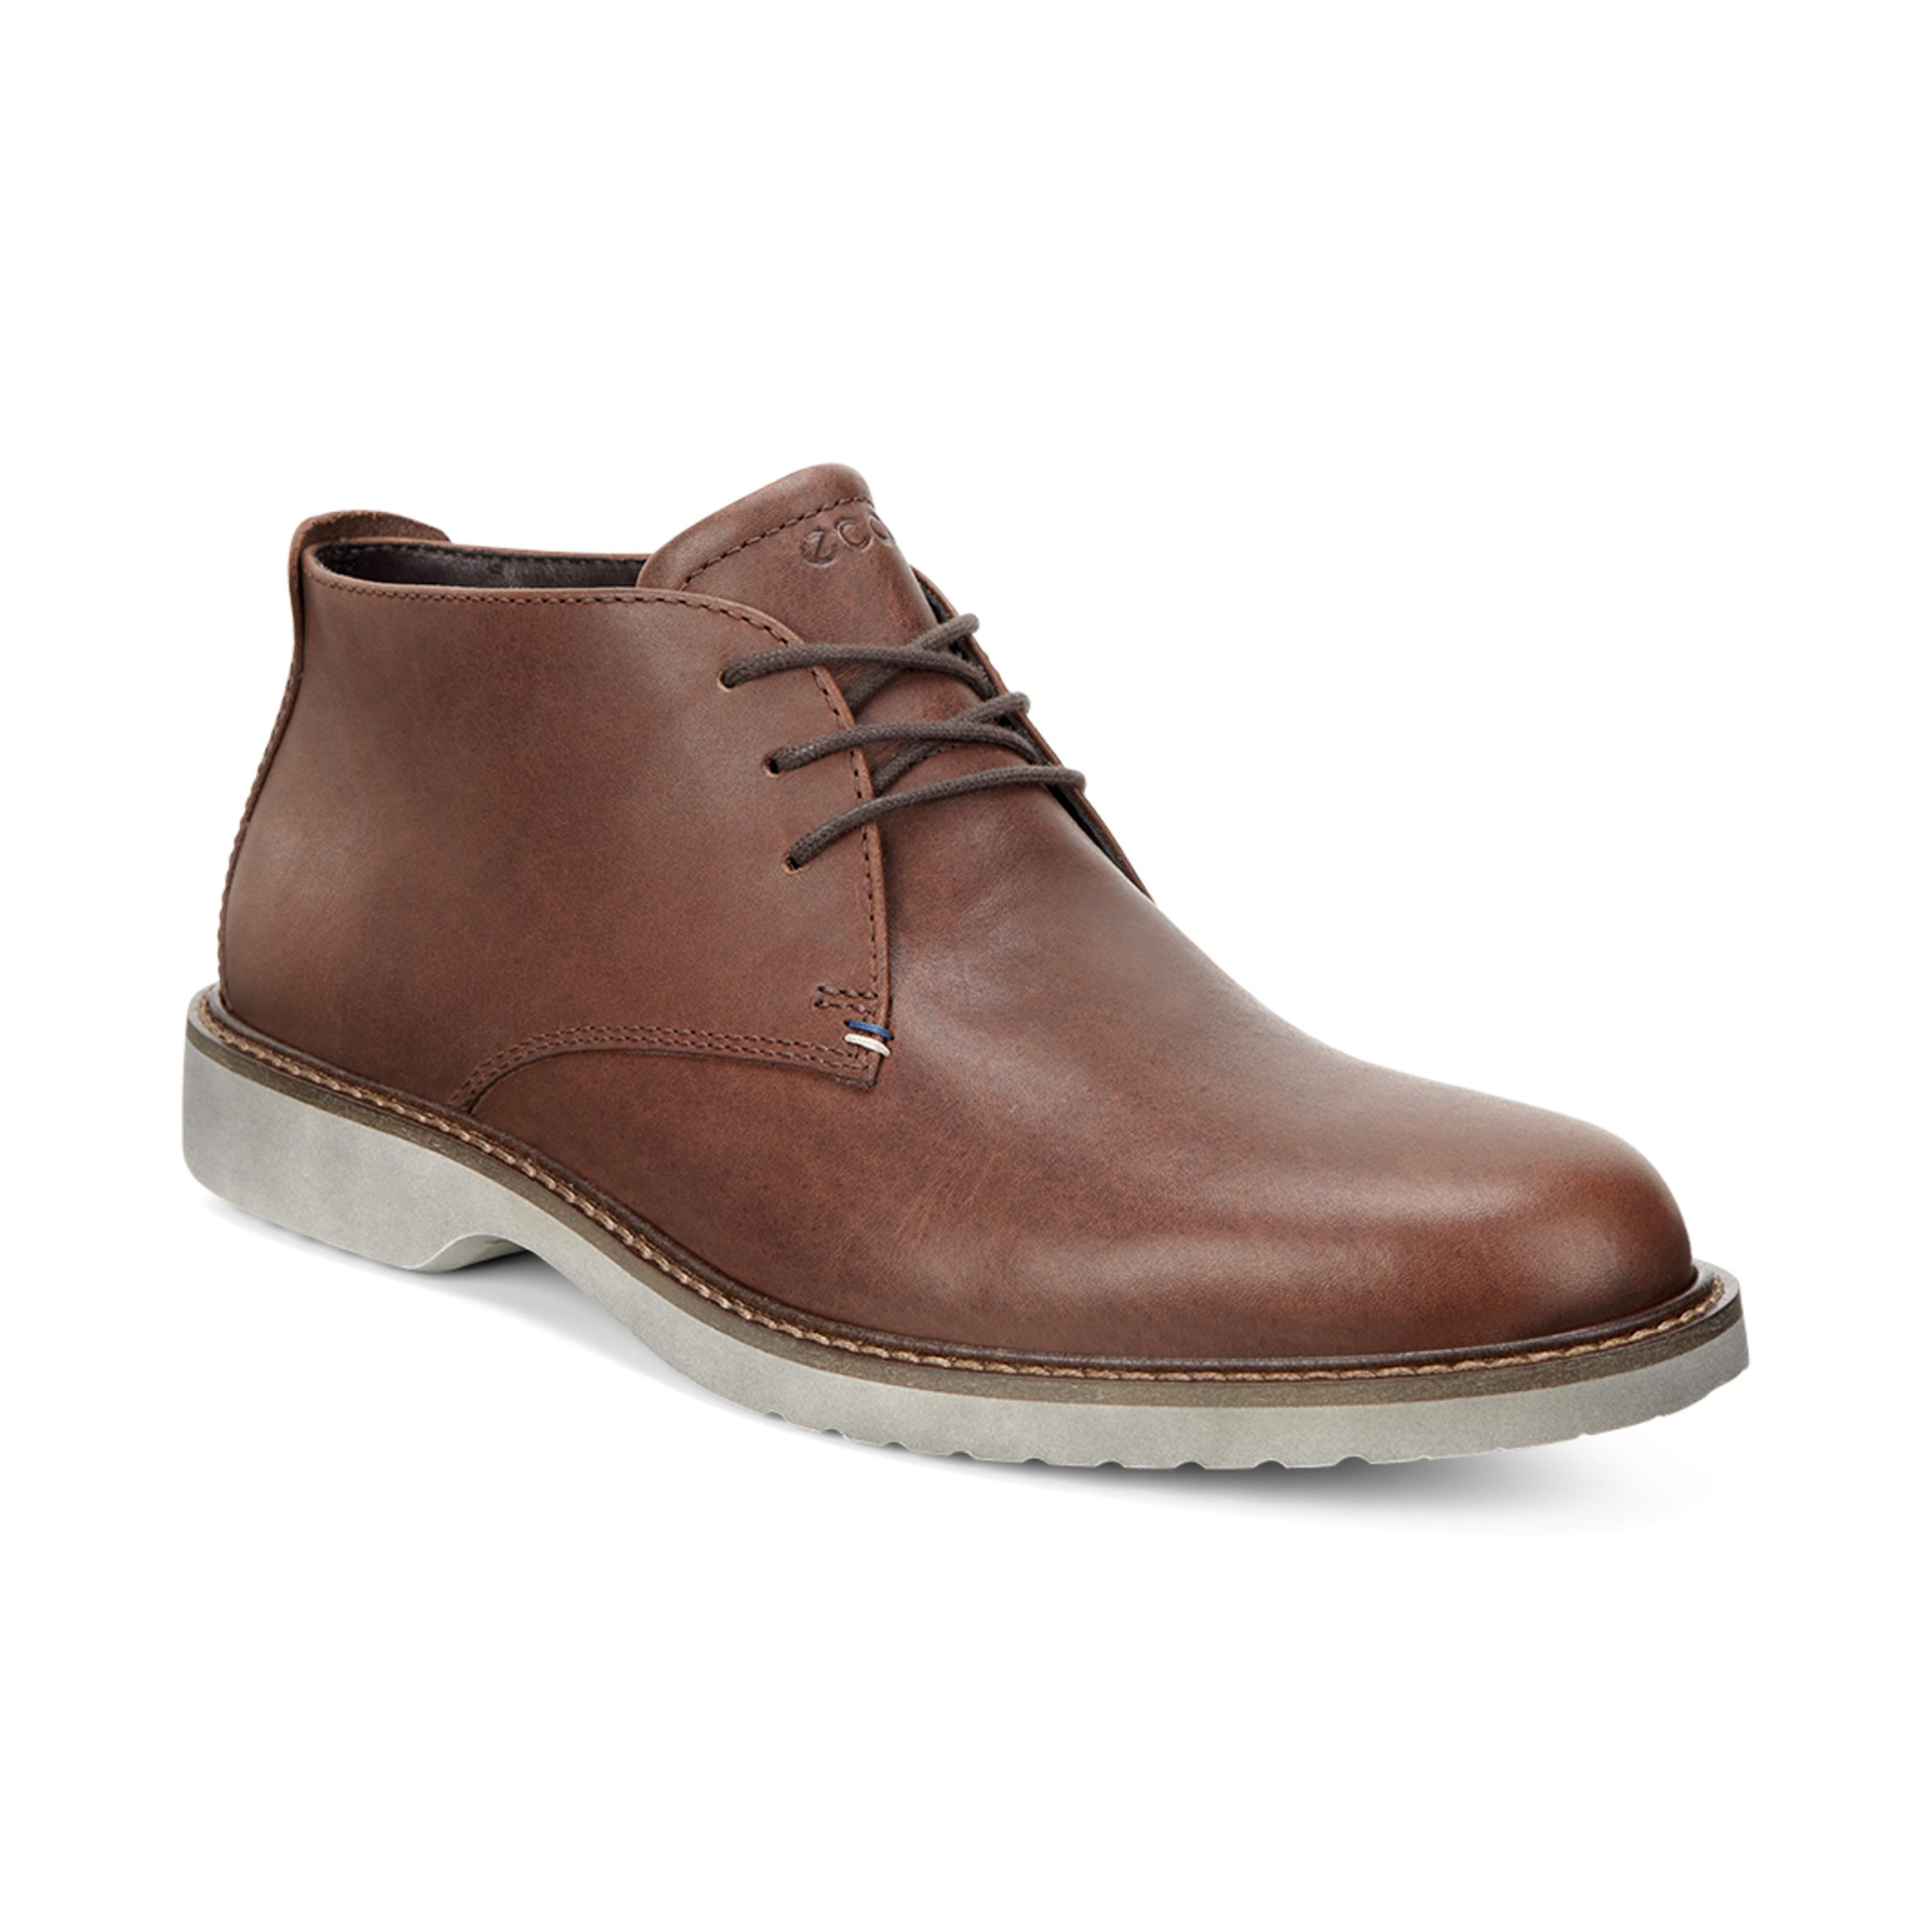 Ecco Ian Chukka Boot 40 - Products Veryk Mall Veryk Mall, many product, quick response, safe your money!